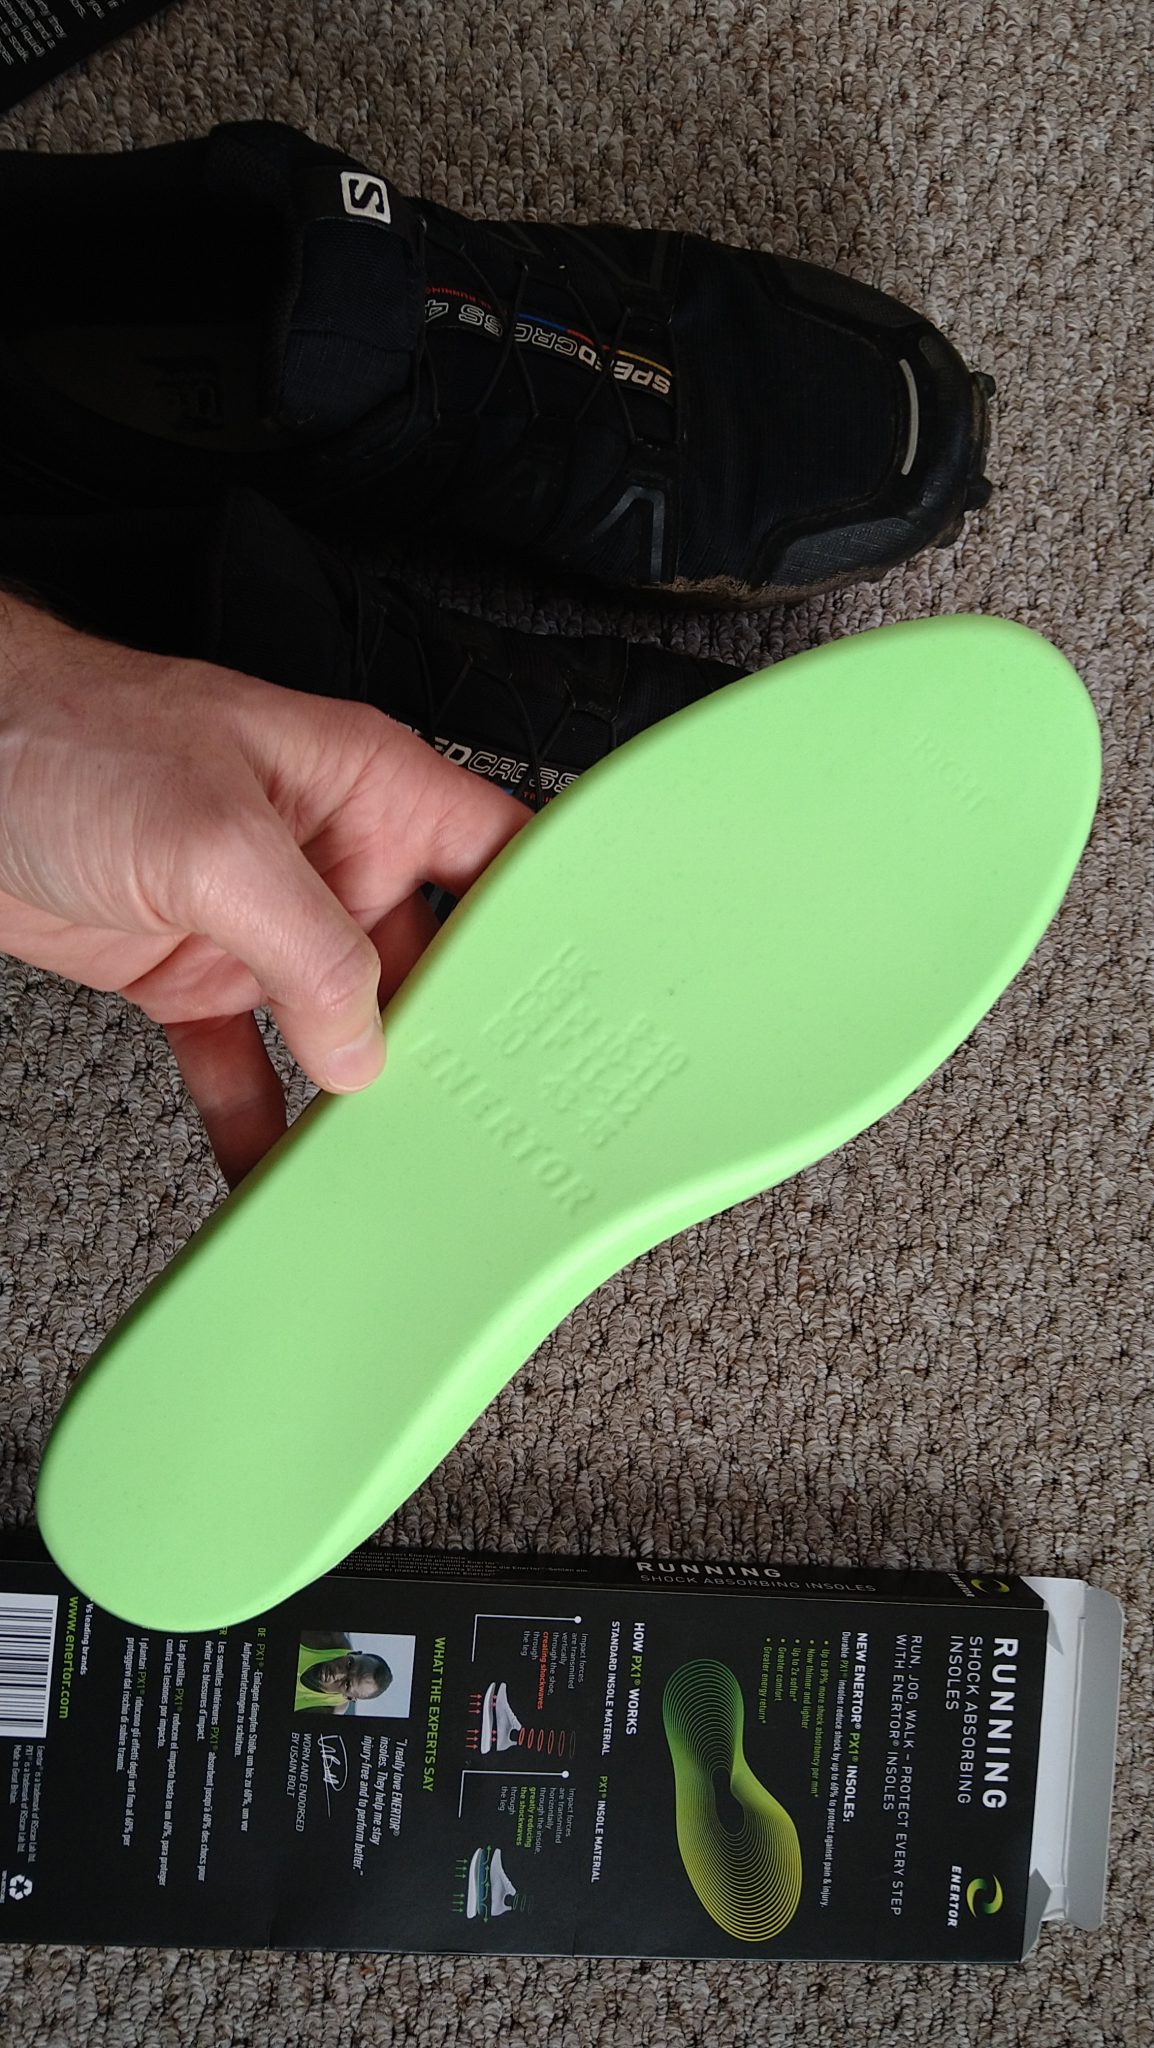 Enertor insoles review: this updated version has PX1 material